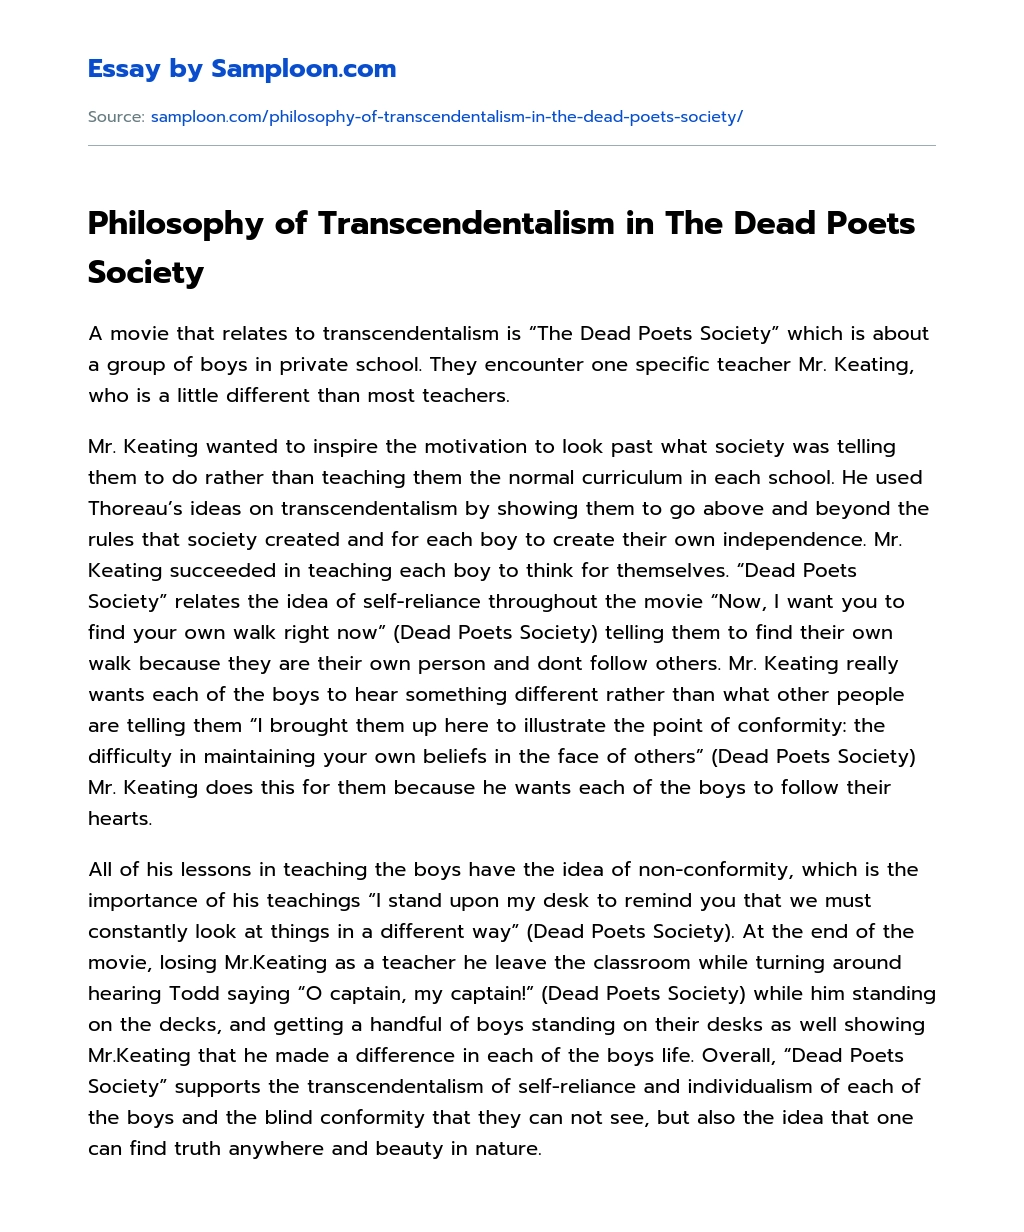 Philosophy of Transcendentalism in The Dead Poets Society essay